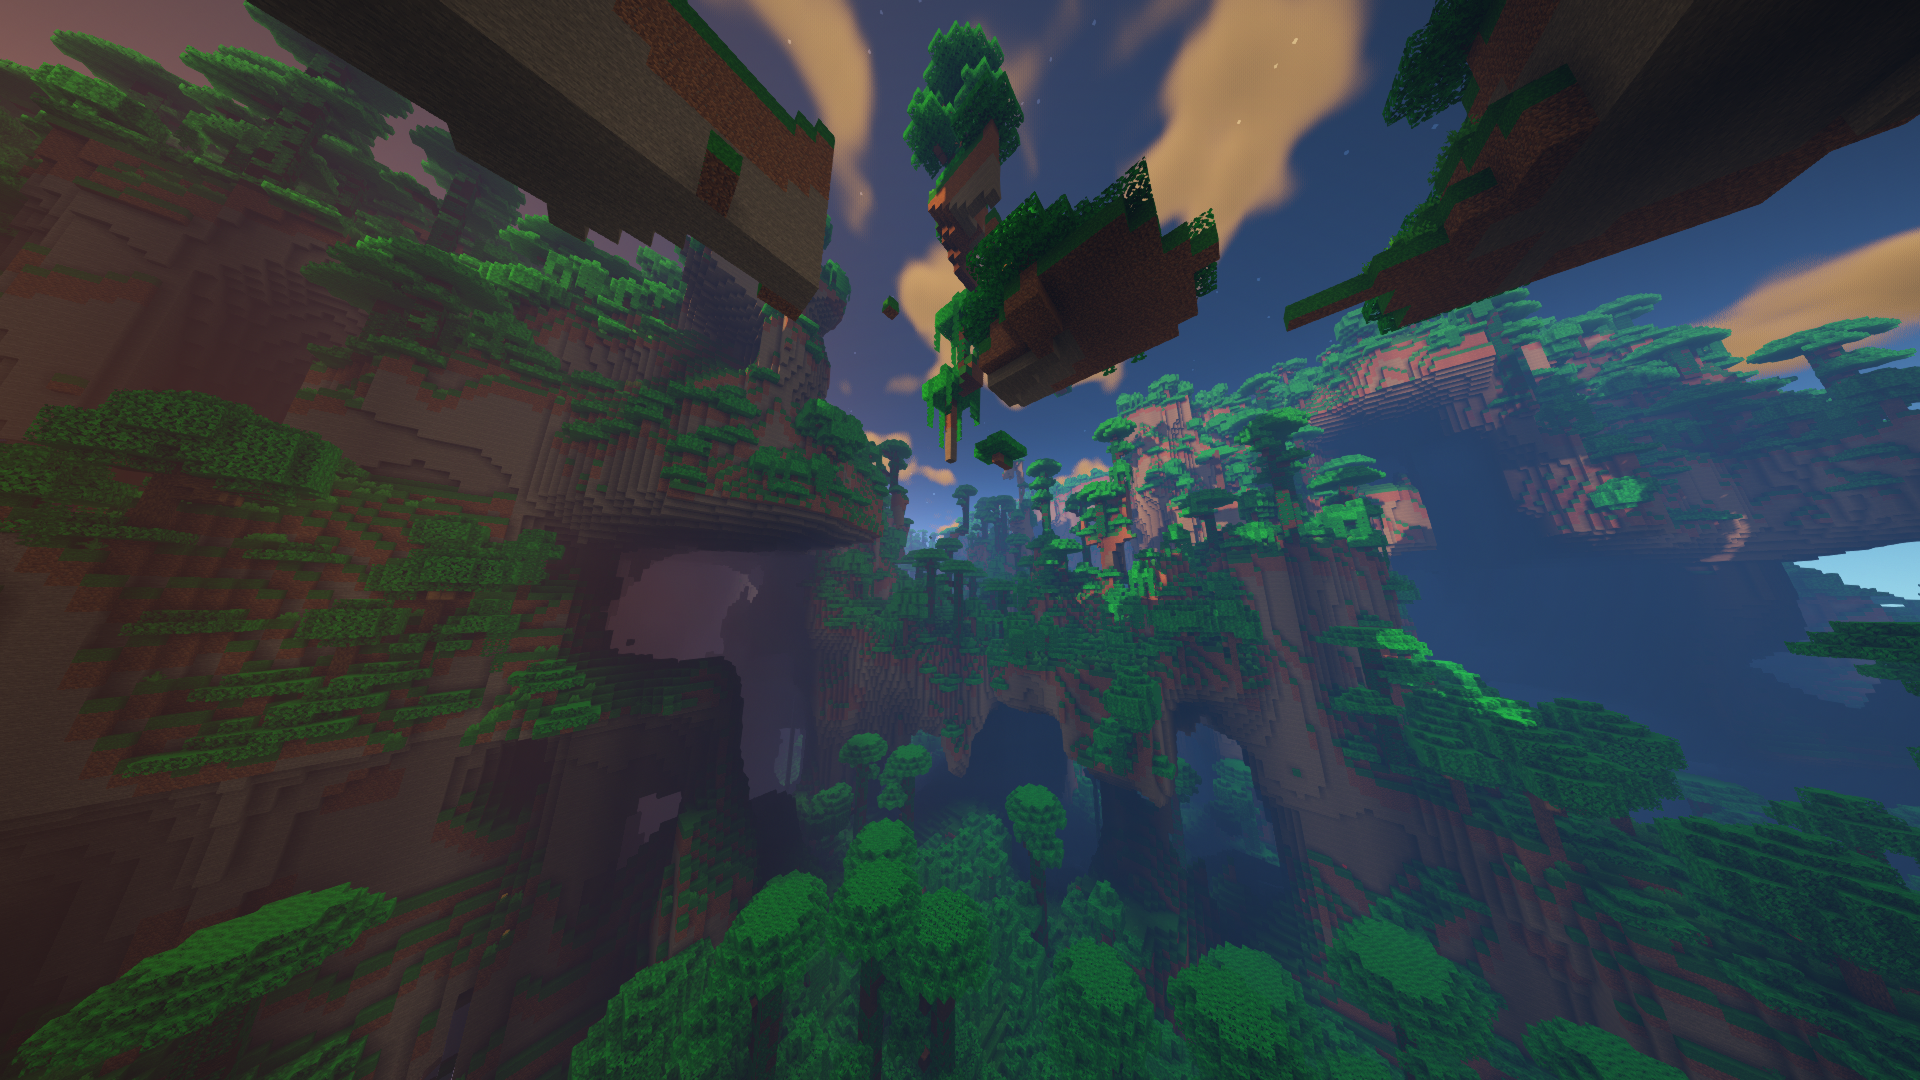 Amplified Jungle #3 Shaders